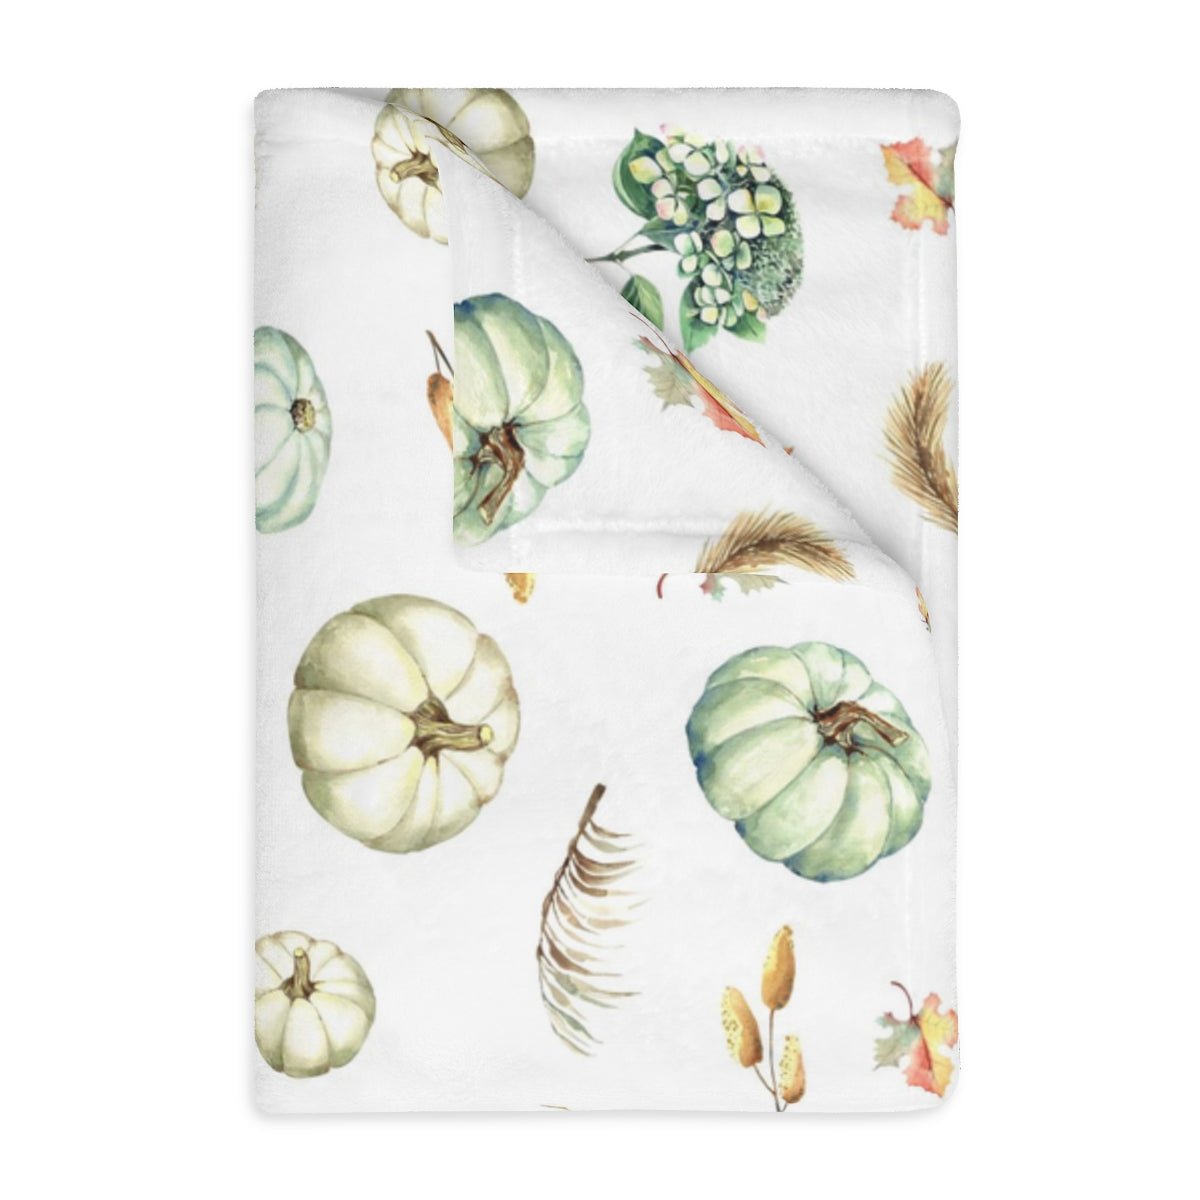 Fall Pumpkins and Leaves Velveteen Minky Blanket 40" × 30" (Two-sided print) - Puffin Lime